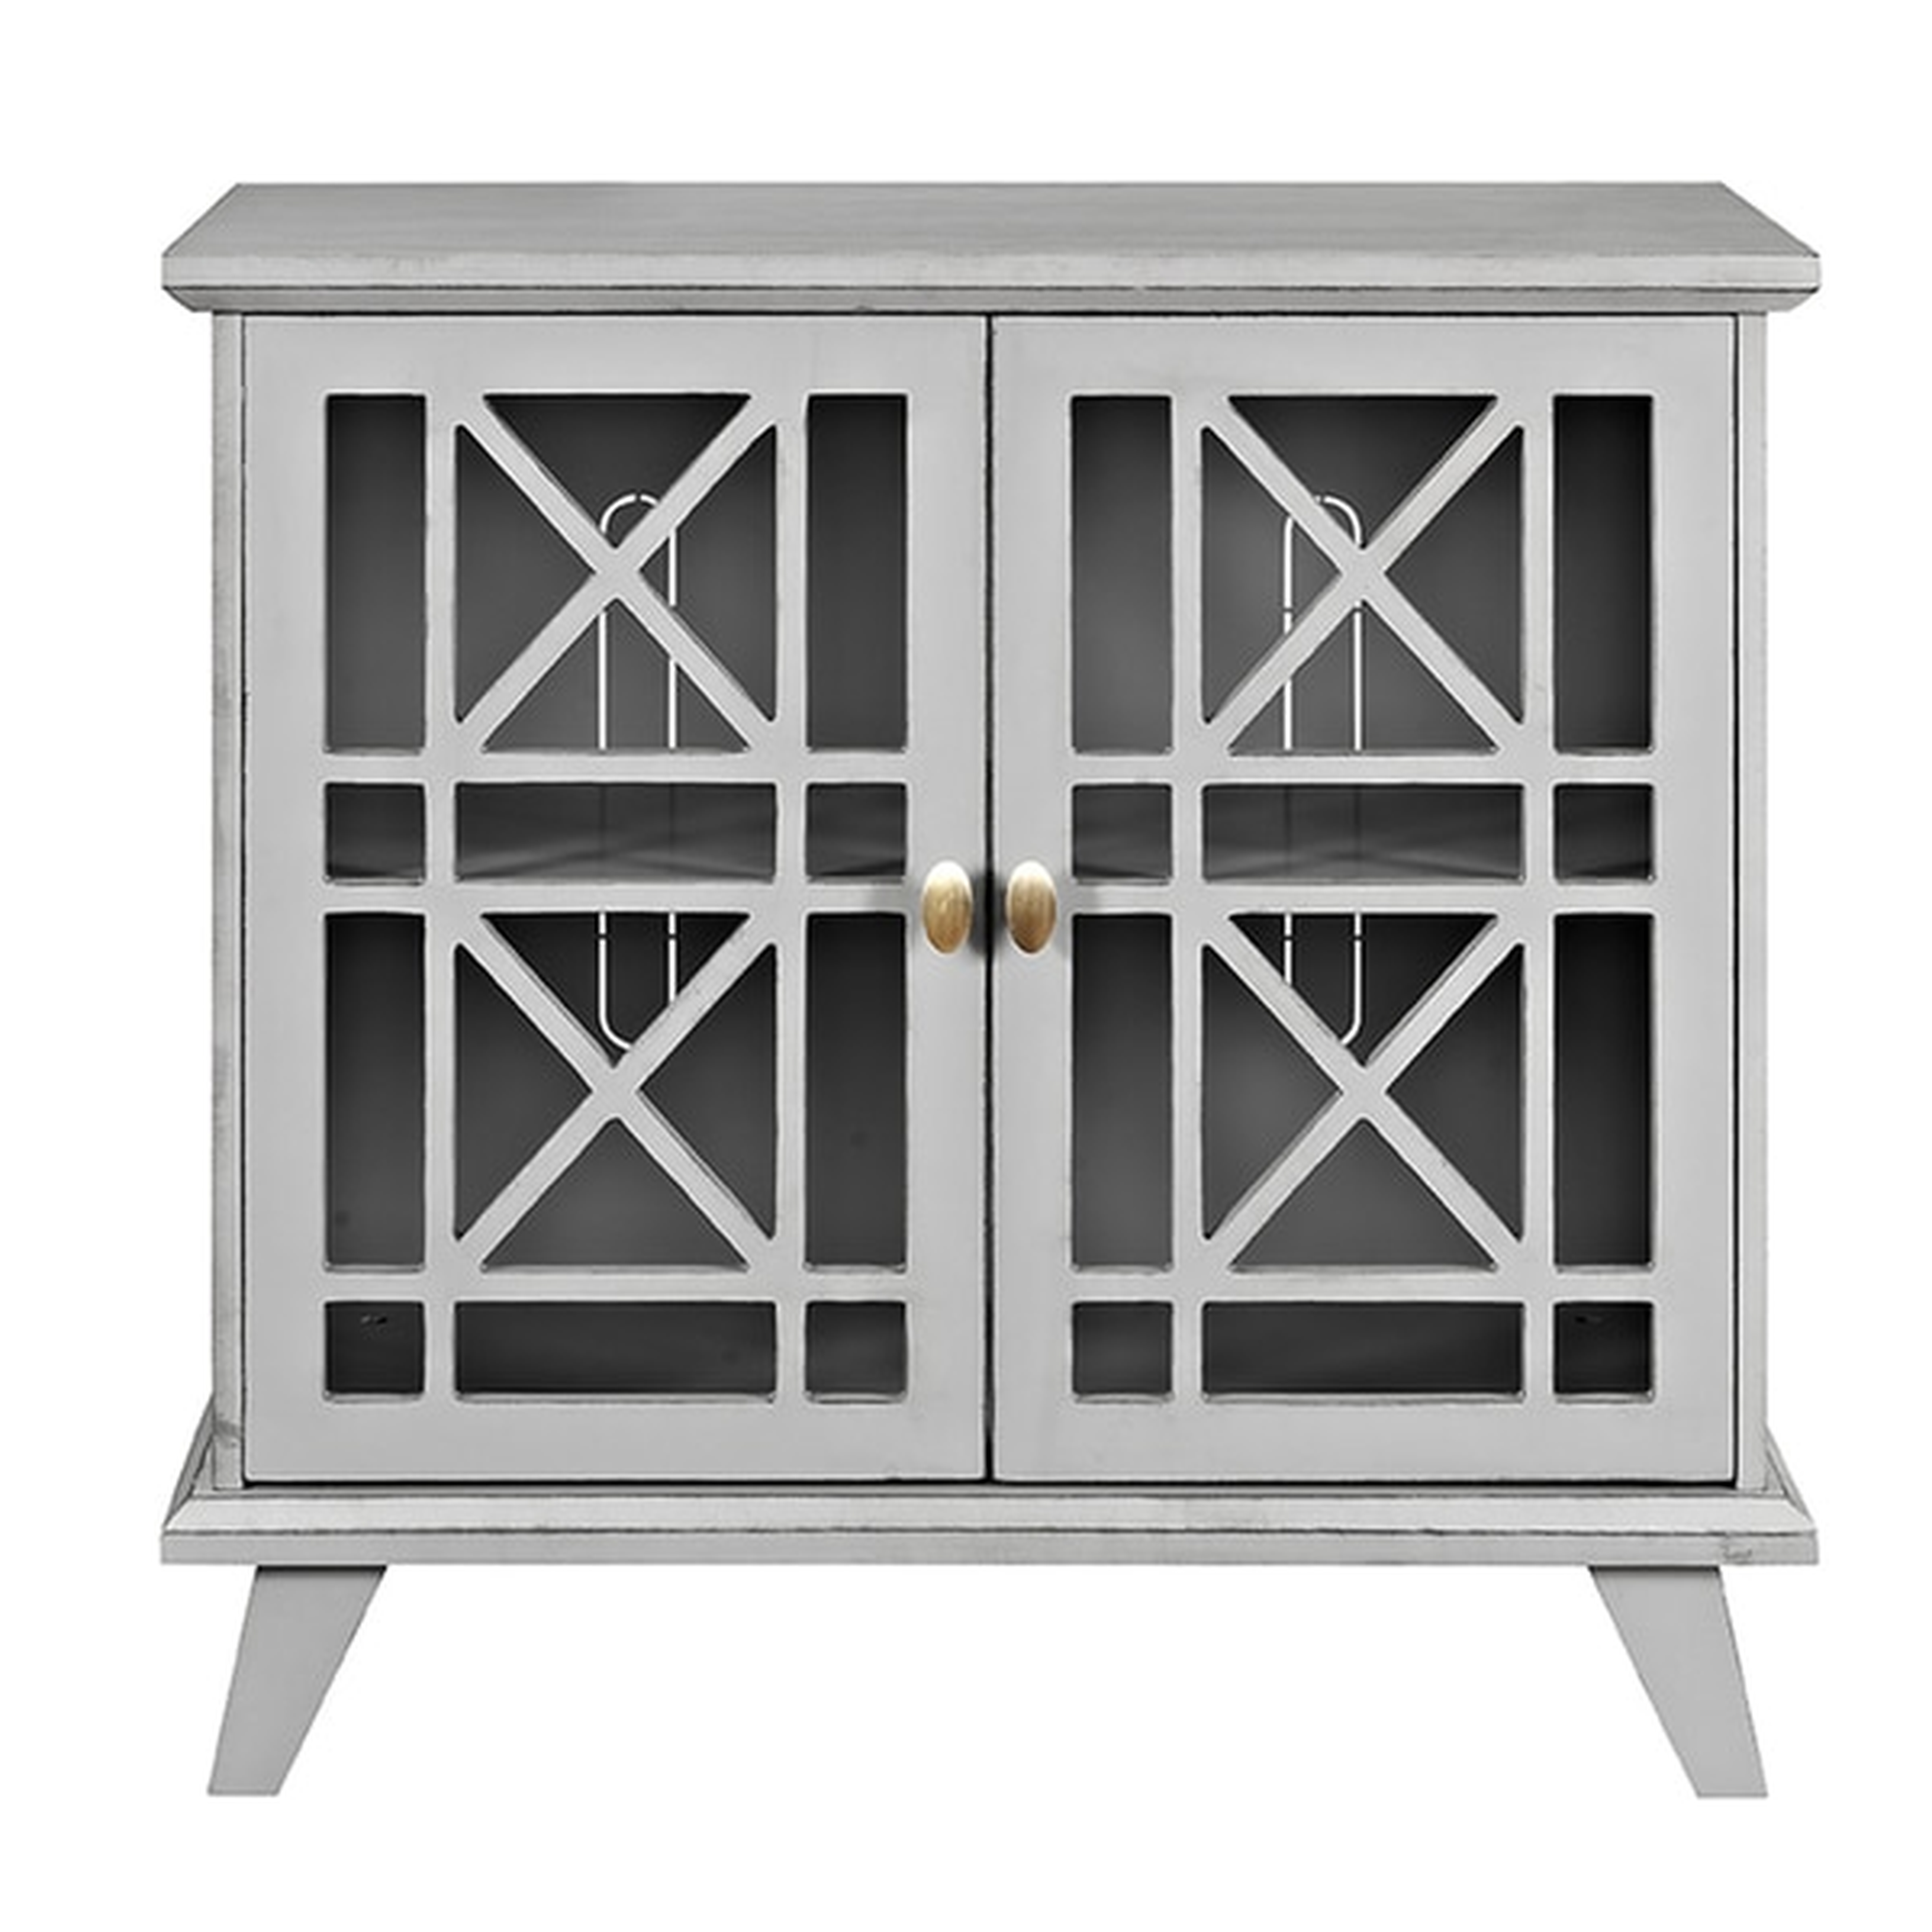 32-inch Fretwork Grey Entryway Console - Overstock